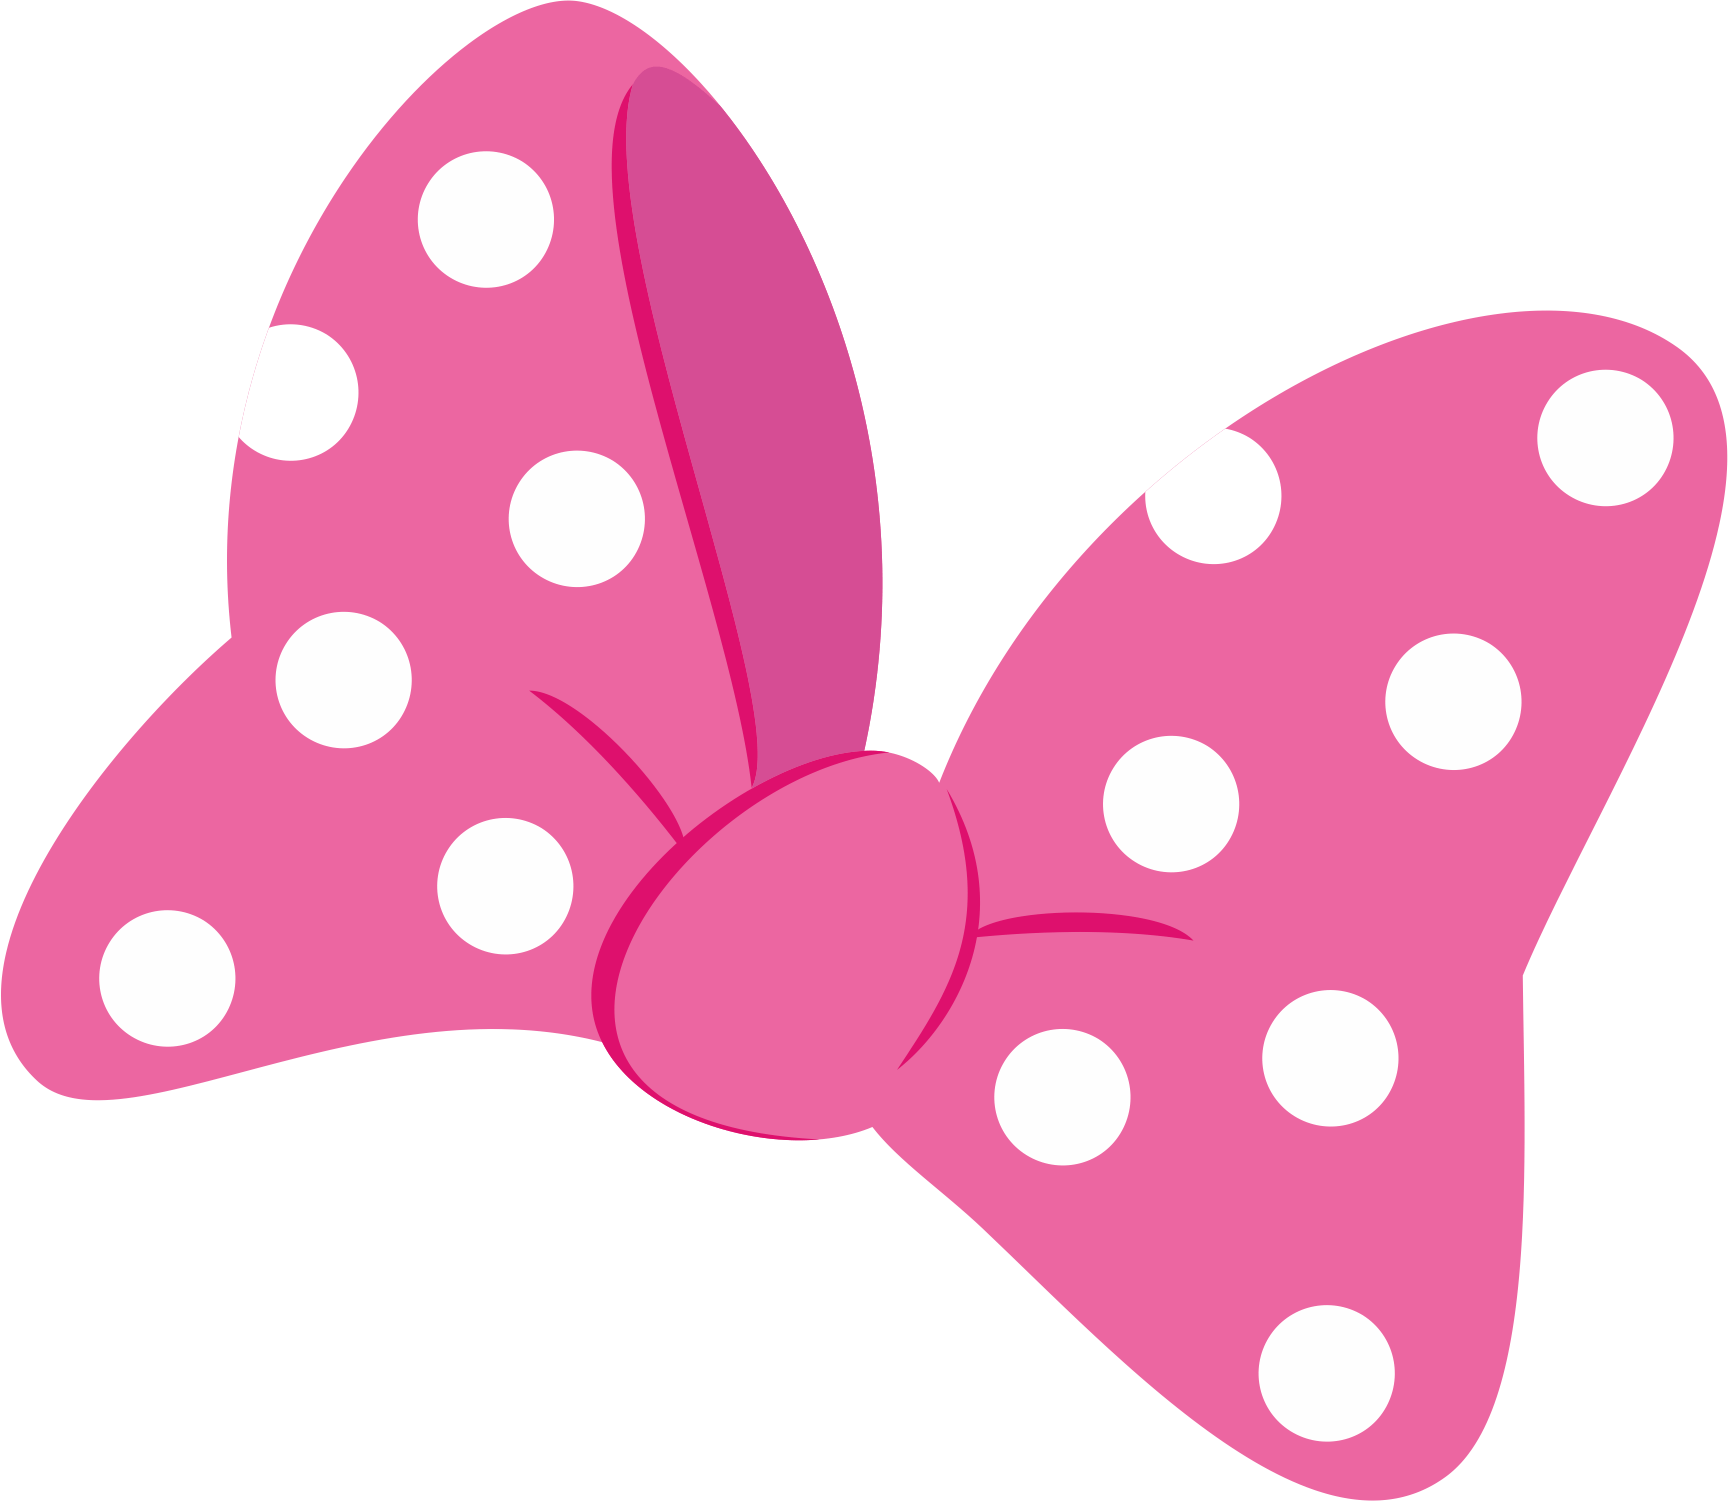 Pink Polka Dotted Bow Illustration